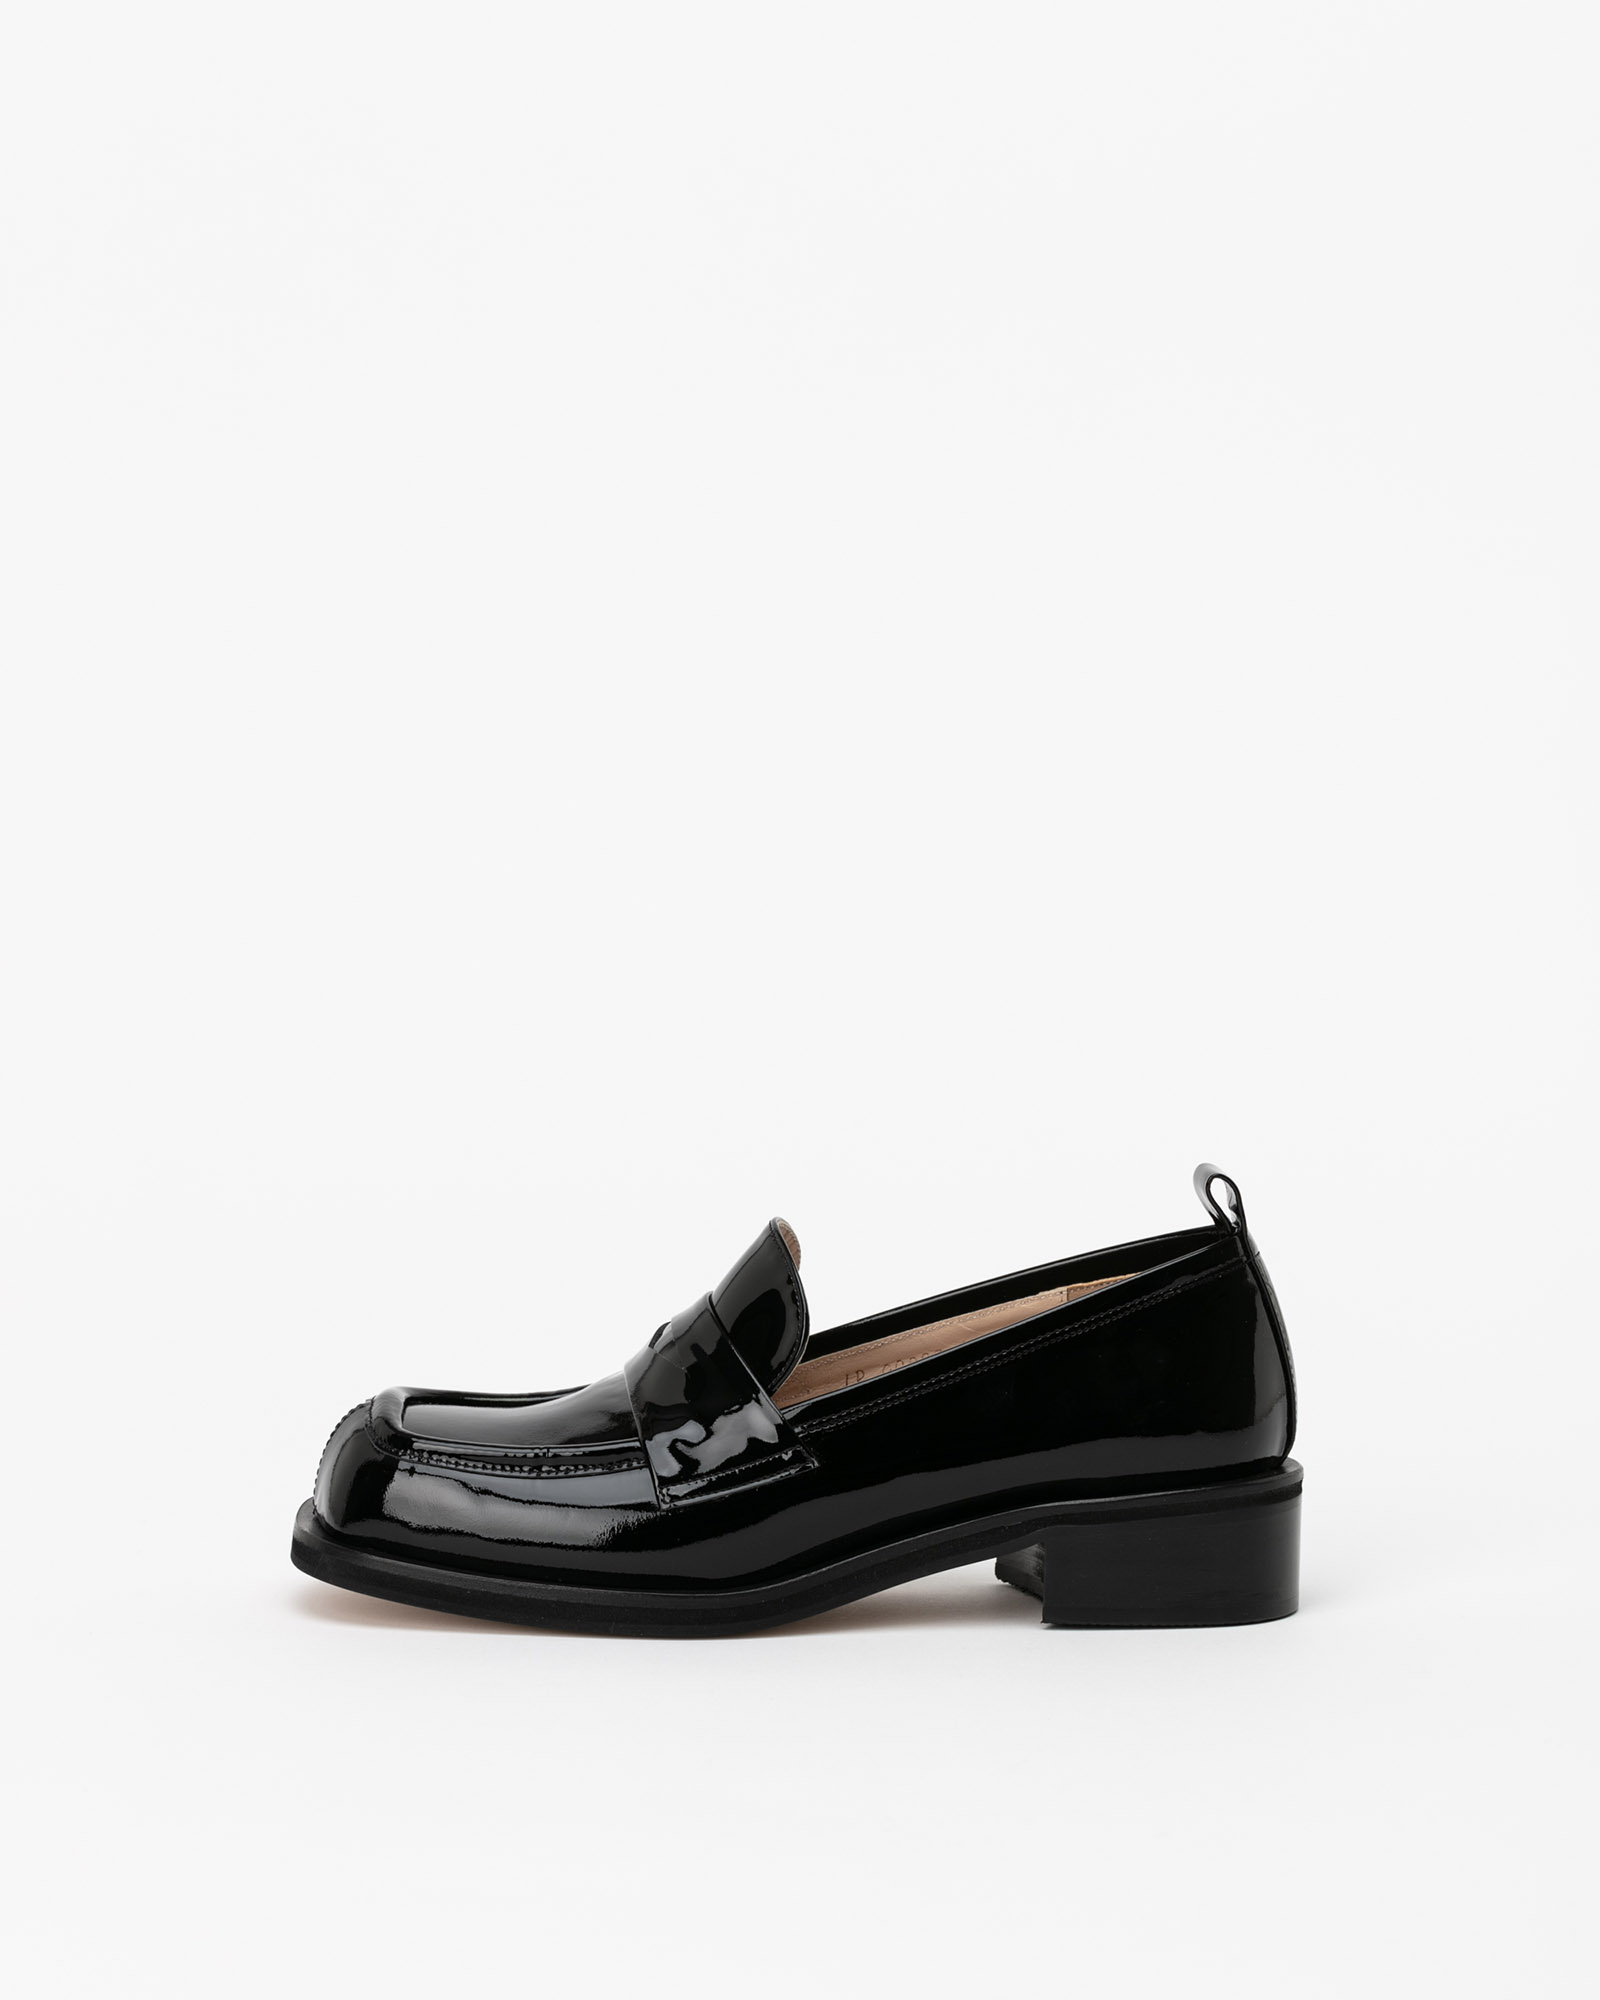 Madrigalo Loafers in Black Patent